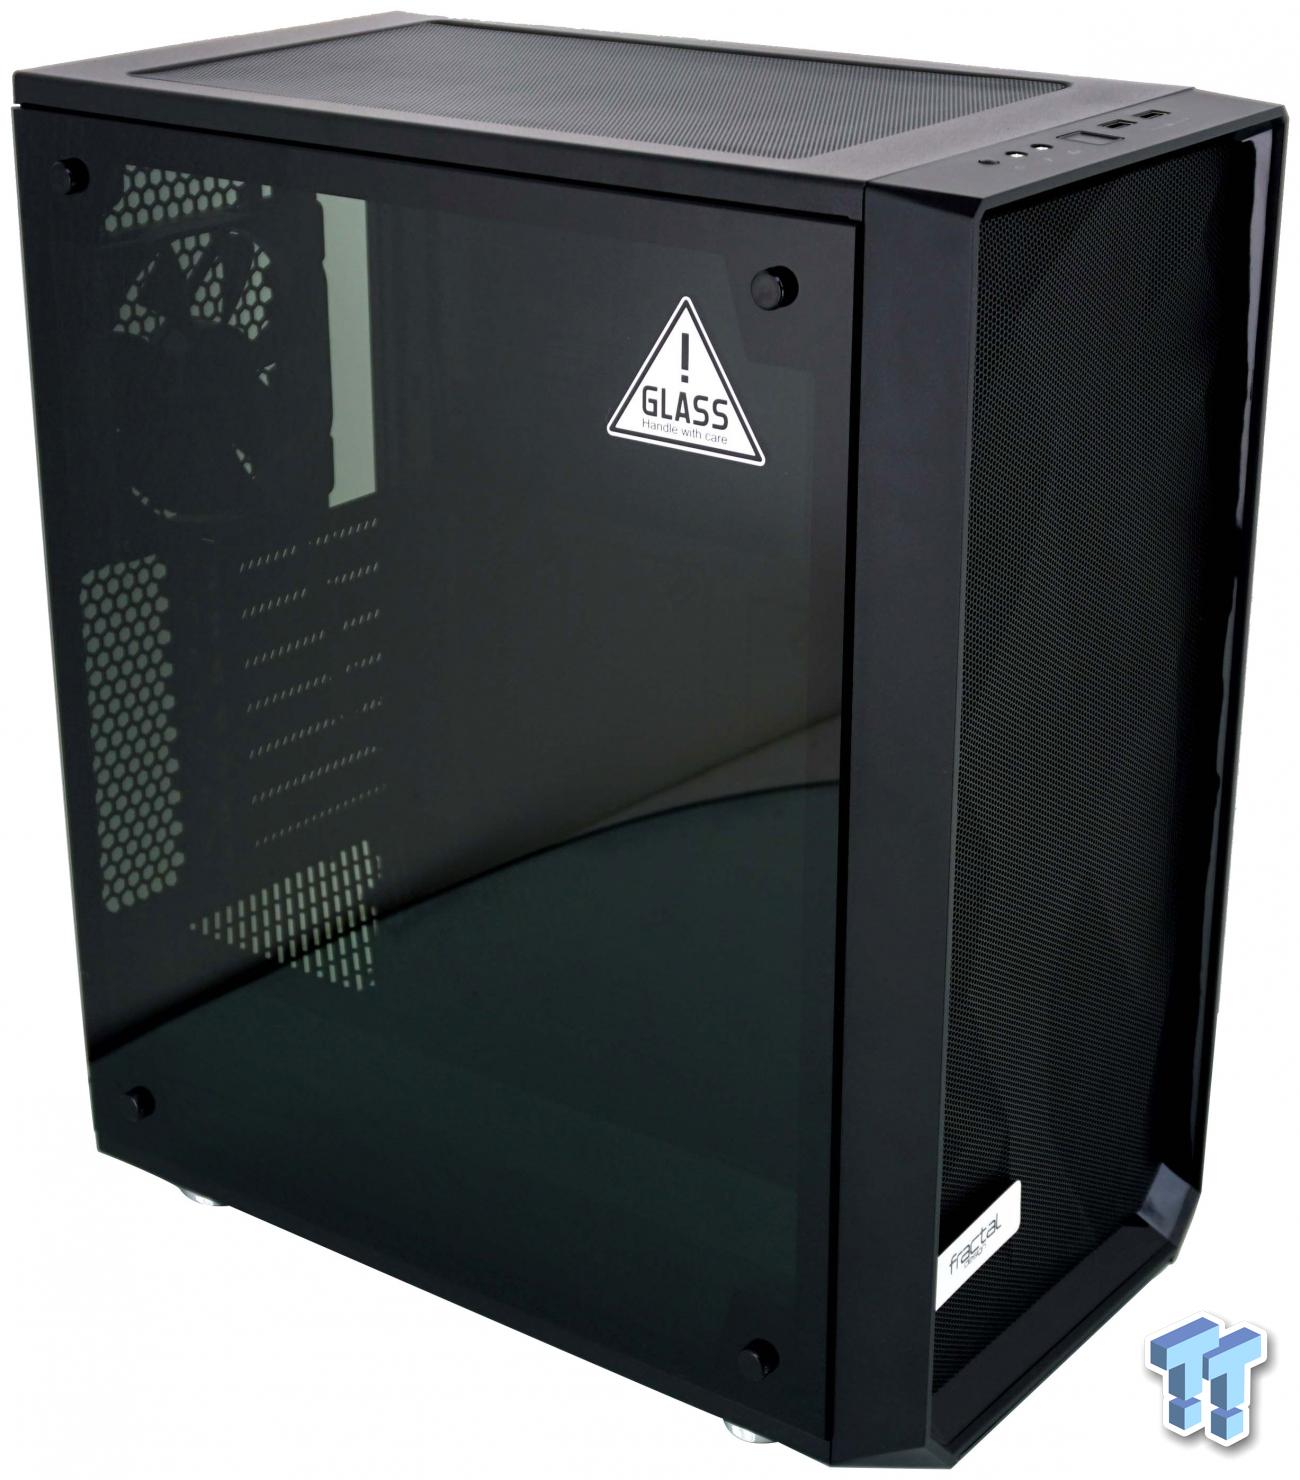 Fractal Design Meshify C Mid Tower Chassis Review Tweaktown,Roller Coaster Design Game